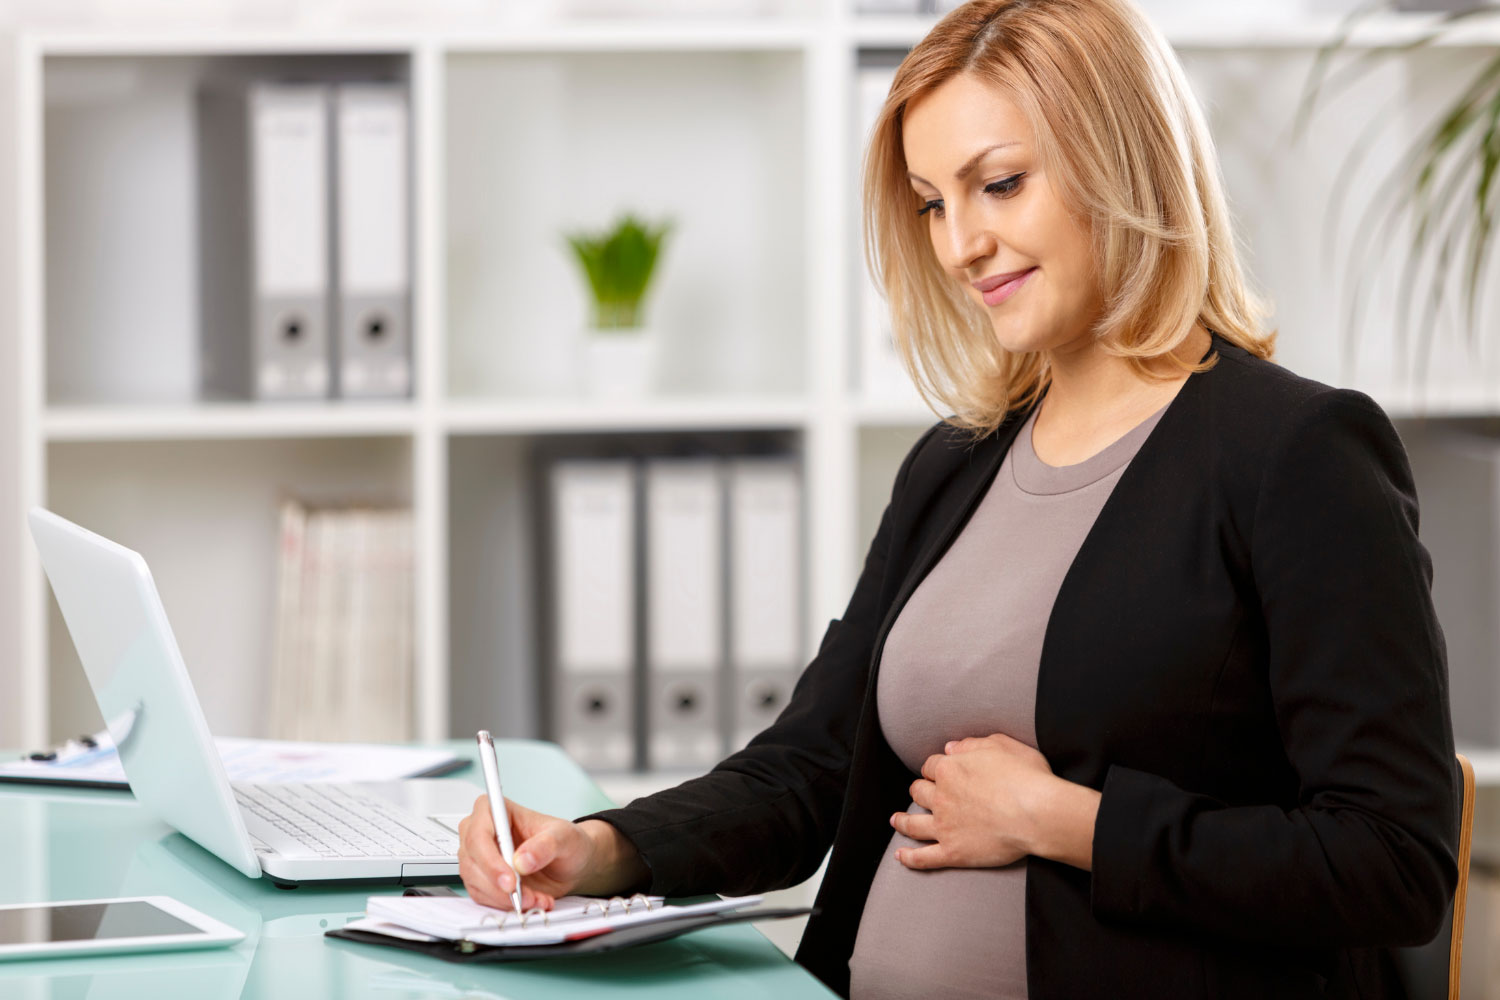 Upcoming Event: How pregnancy discrimination affects women in the workplace